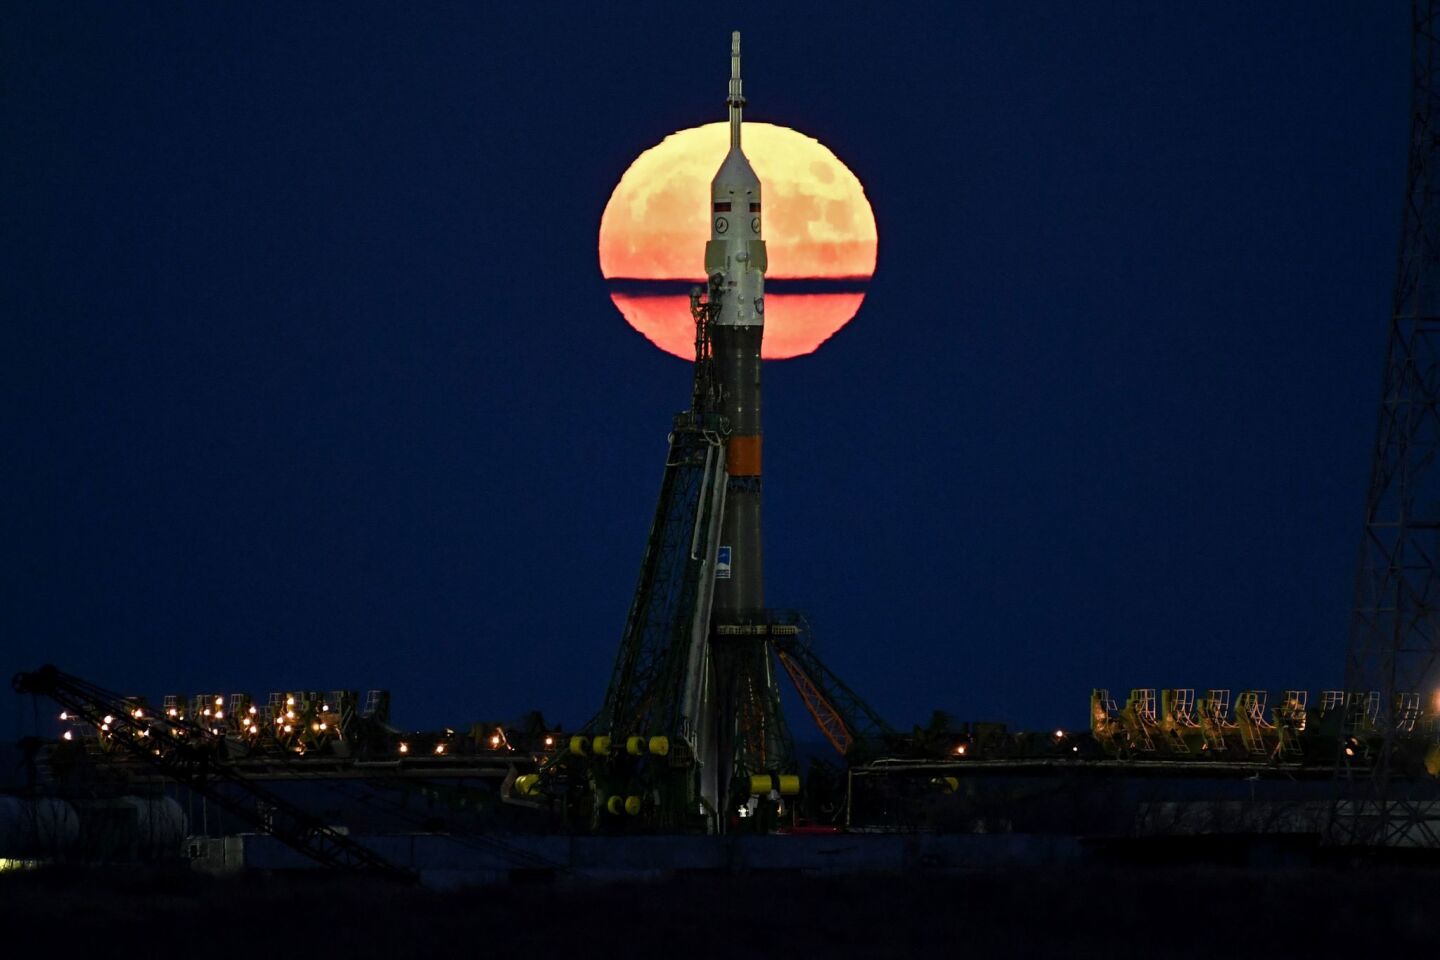 The supermoon is seen behind the Soyuz MS-03 spacecraft set on the launch pad at the Russian-leased Baikonur cosmodrome in Kazakhstan.